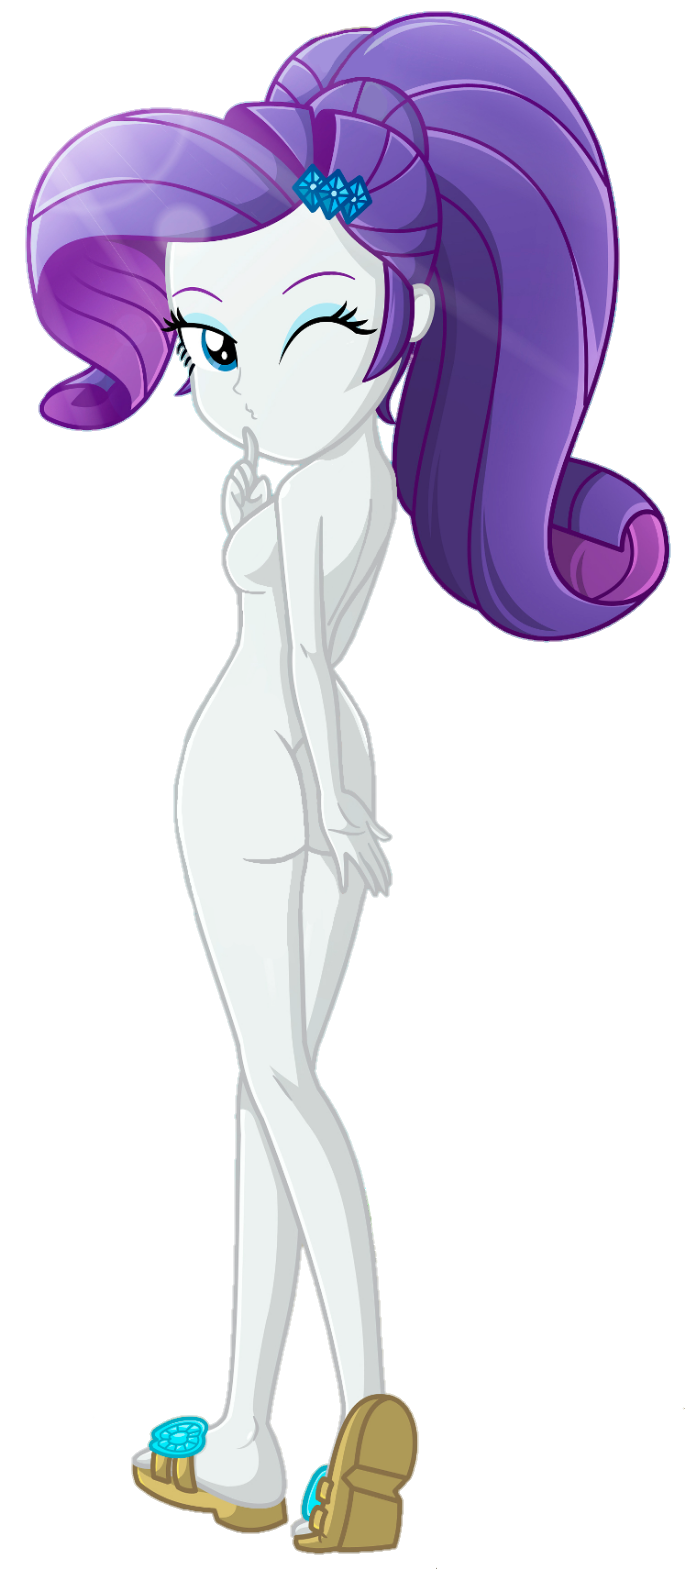 charliexe equestria_girls older older_female rarity rarity_(eg) tagme young_adult young_adult_female young_adult_woman